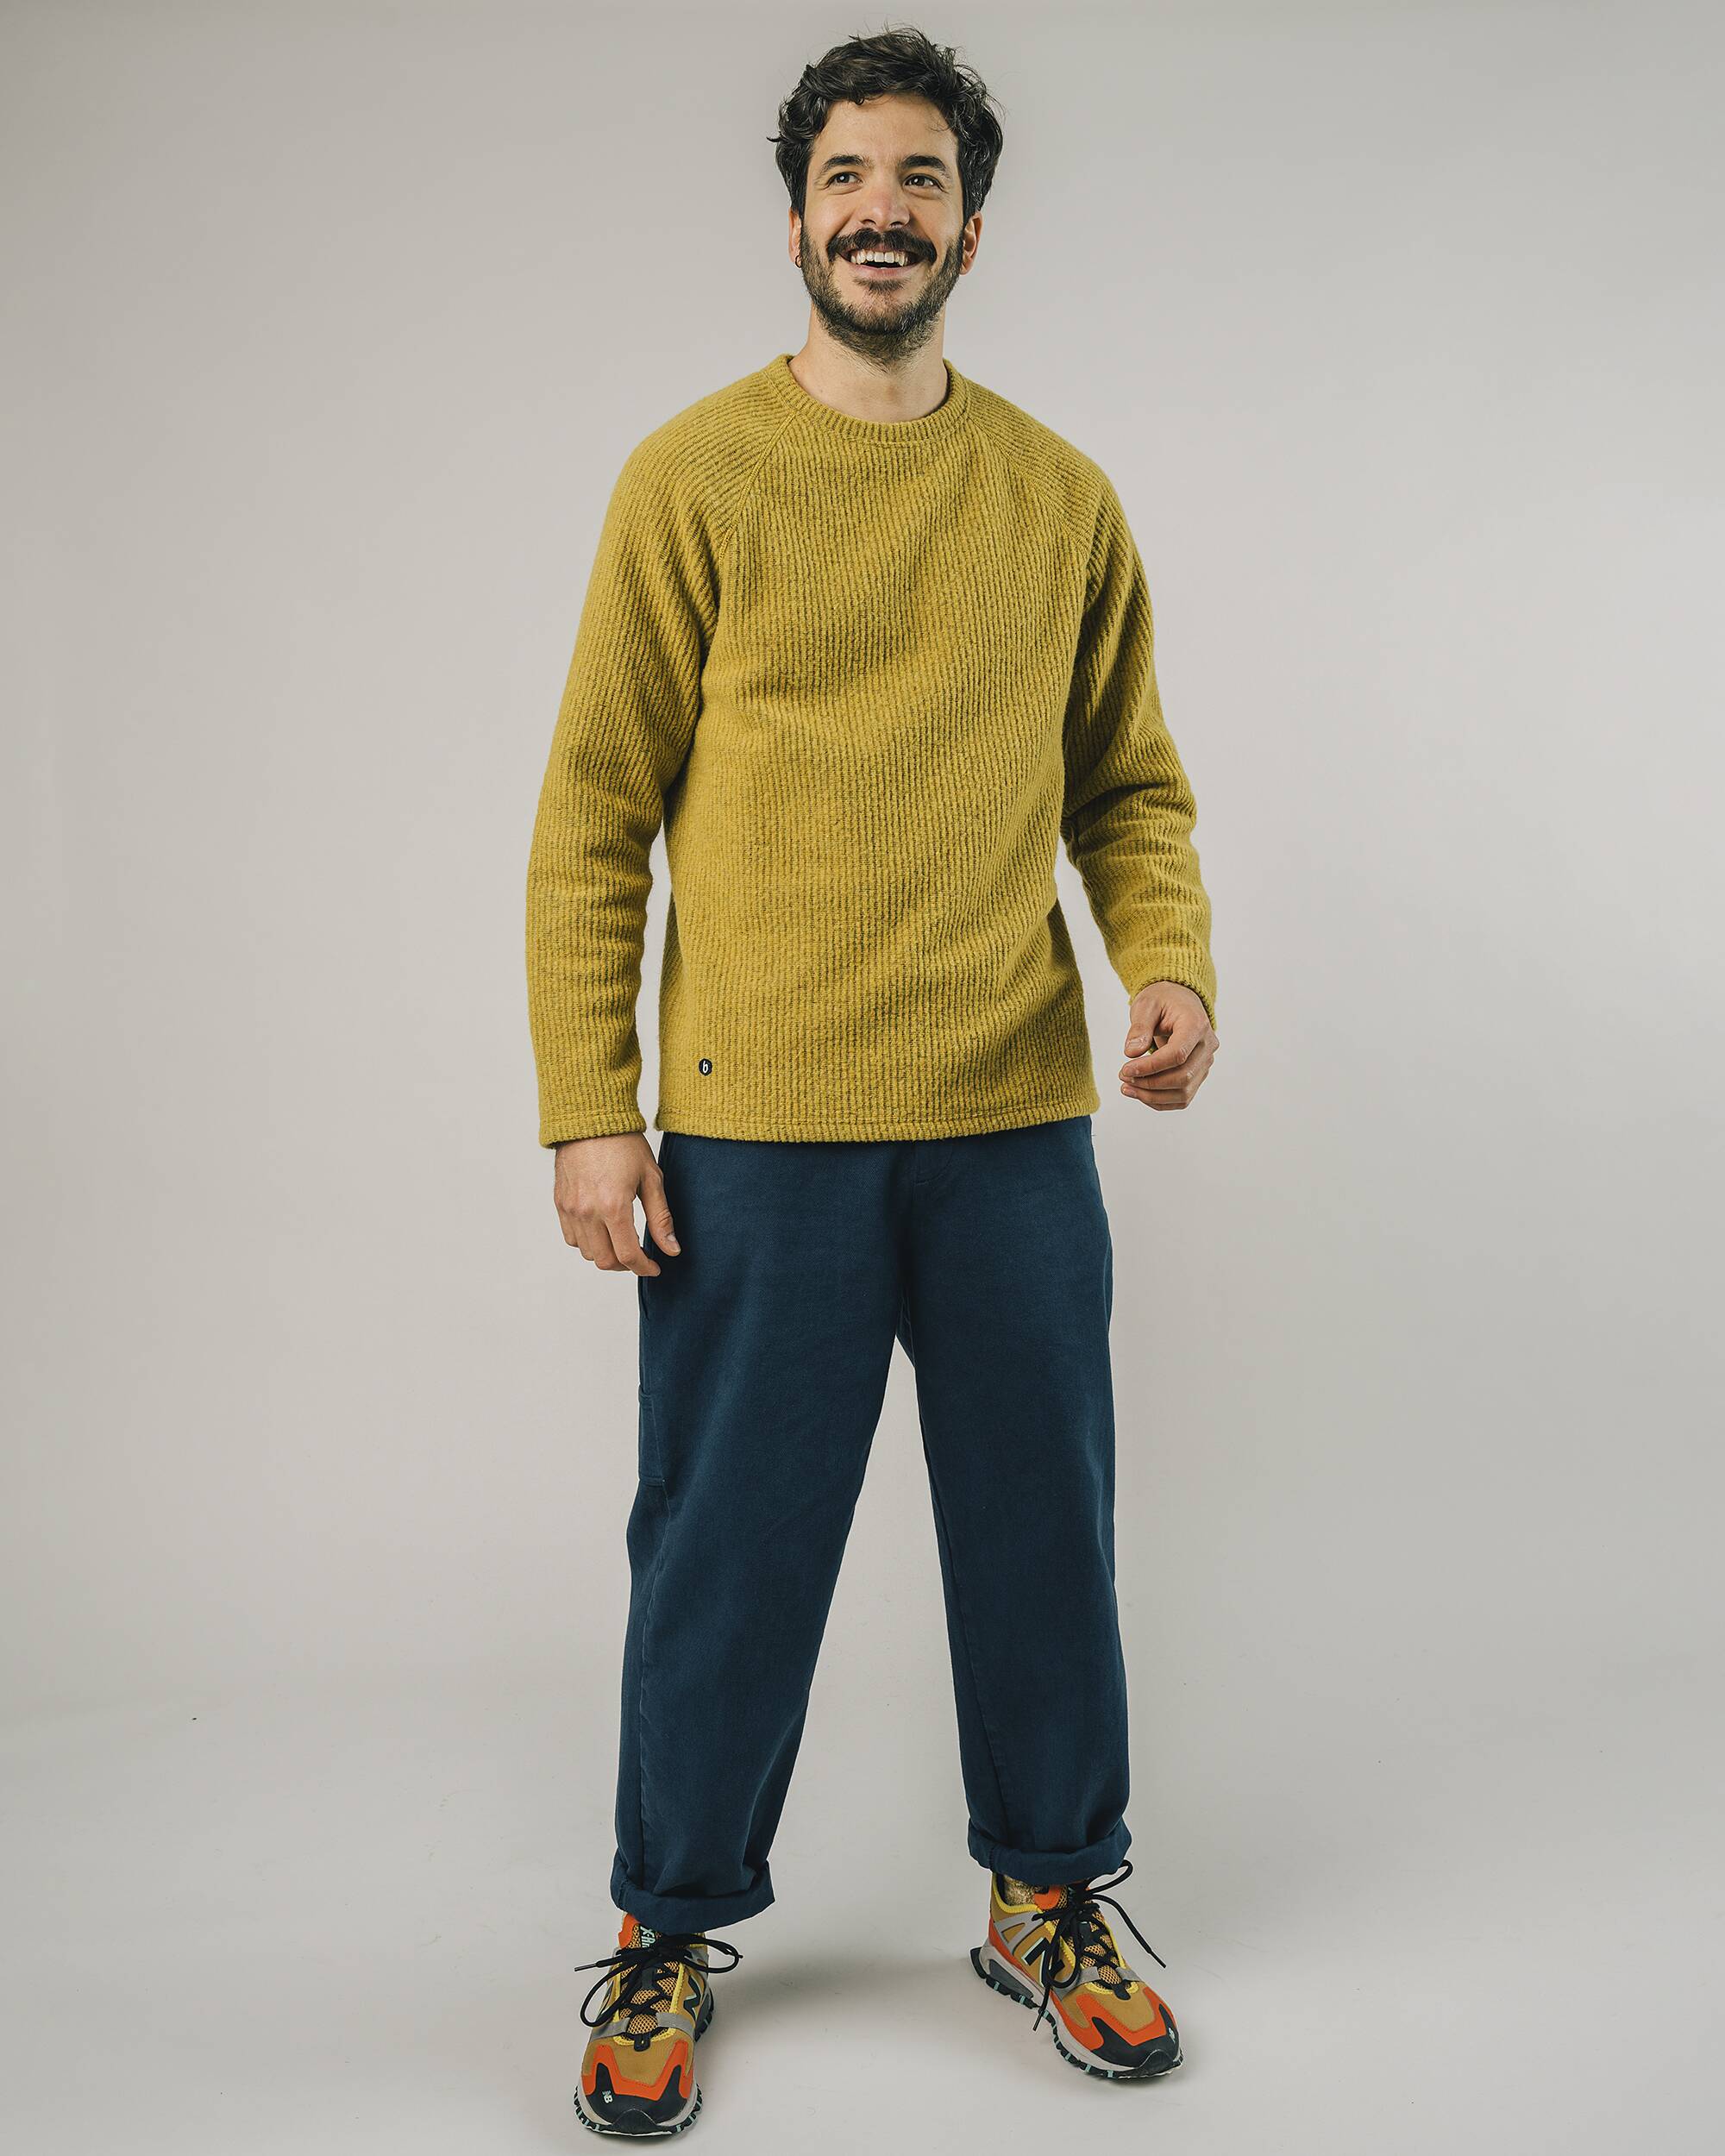 Oversized sweater in mustard - yellow made from recycled materials from Brava Fabrics